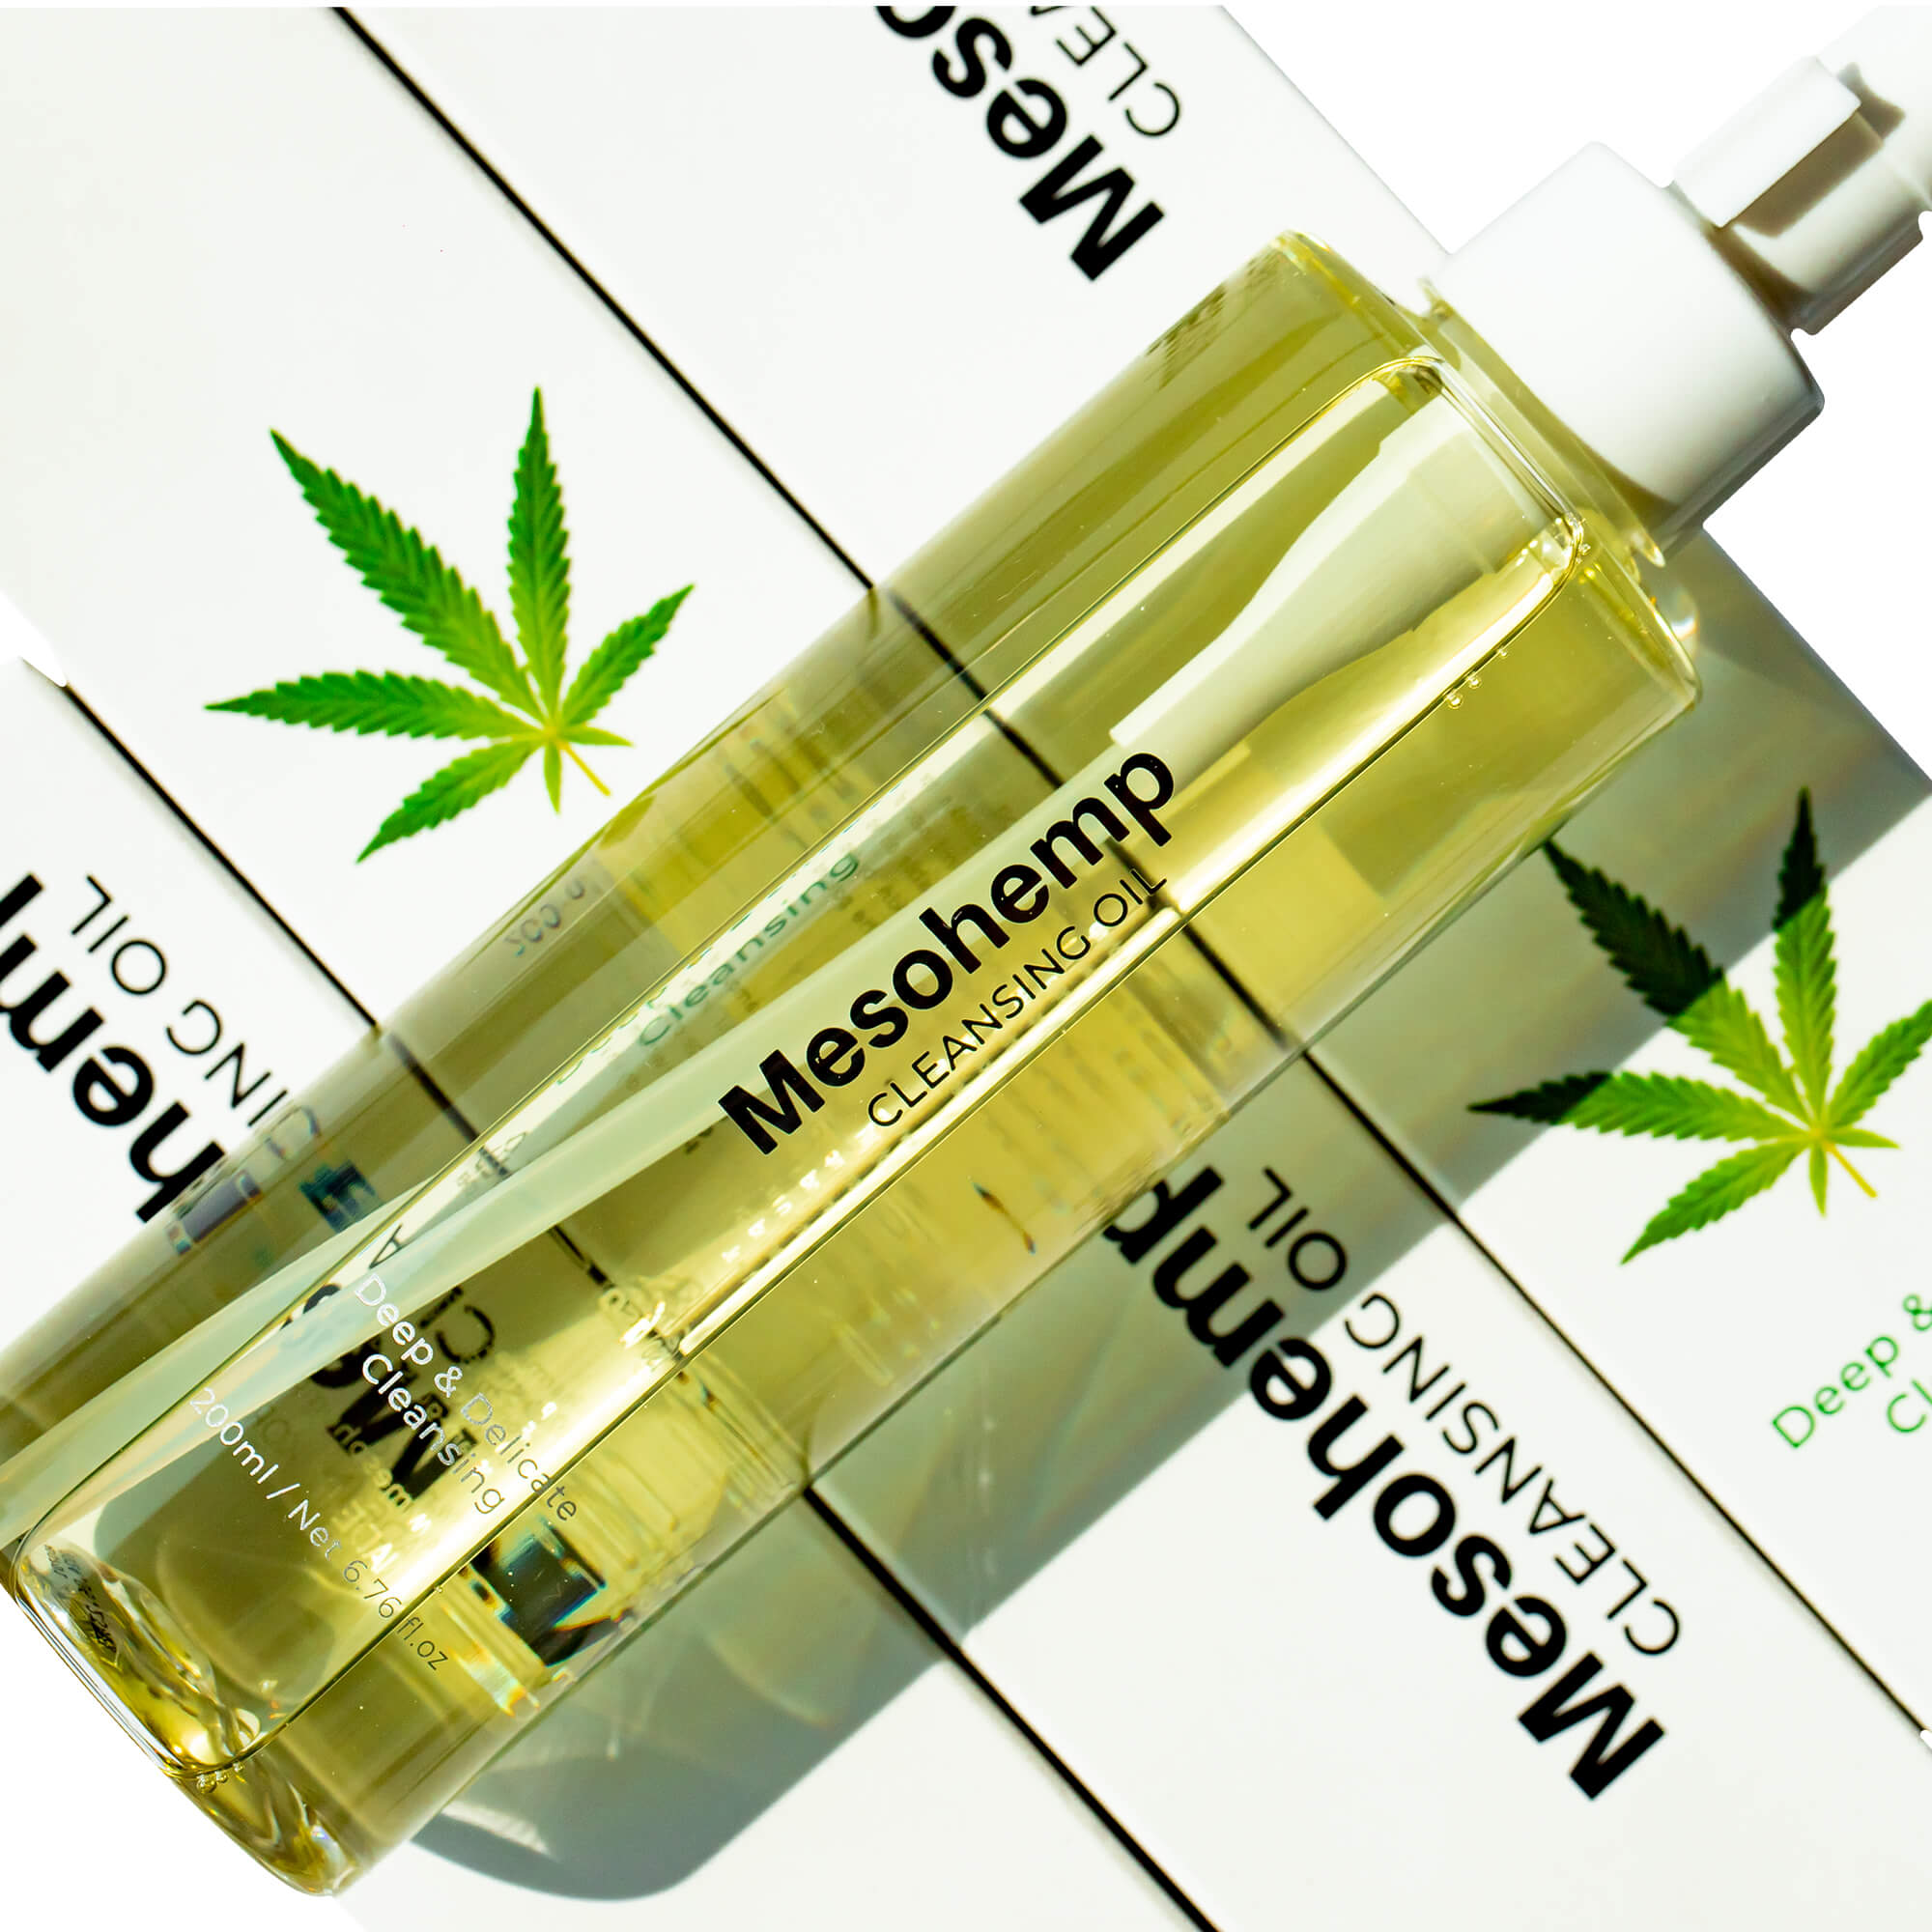 Cleansing Oil -  combination of hemp and vegetable oil